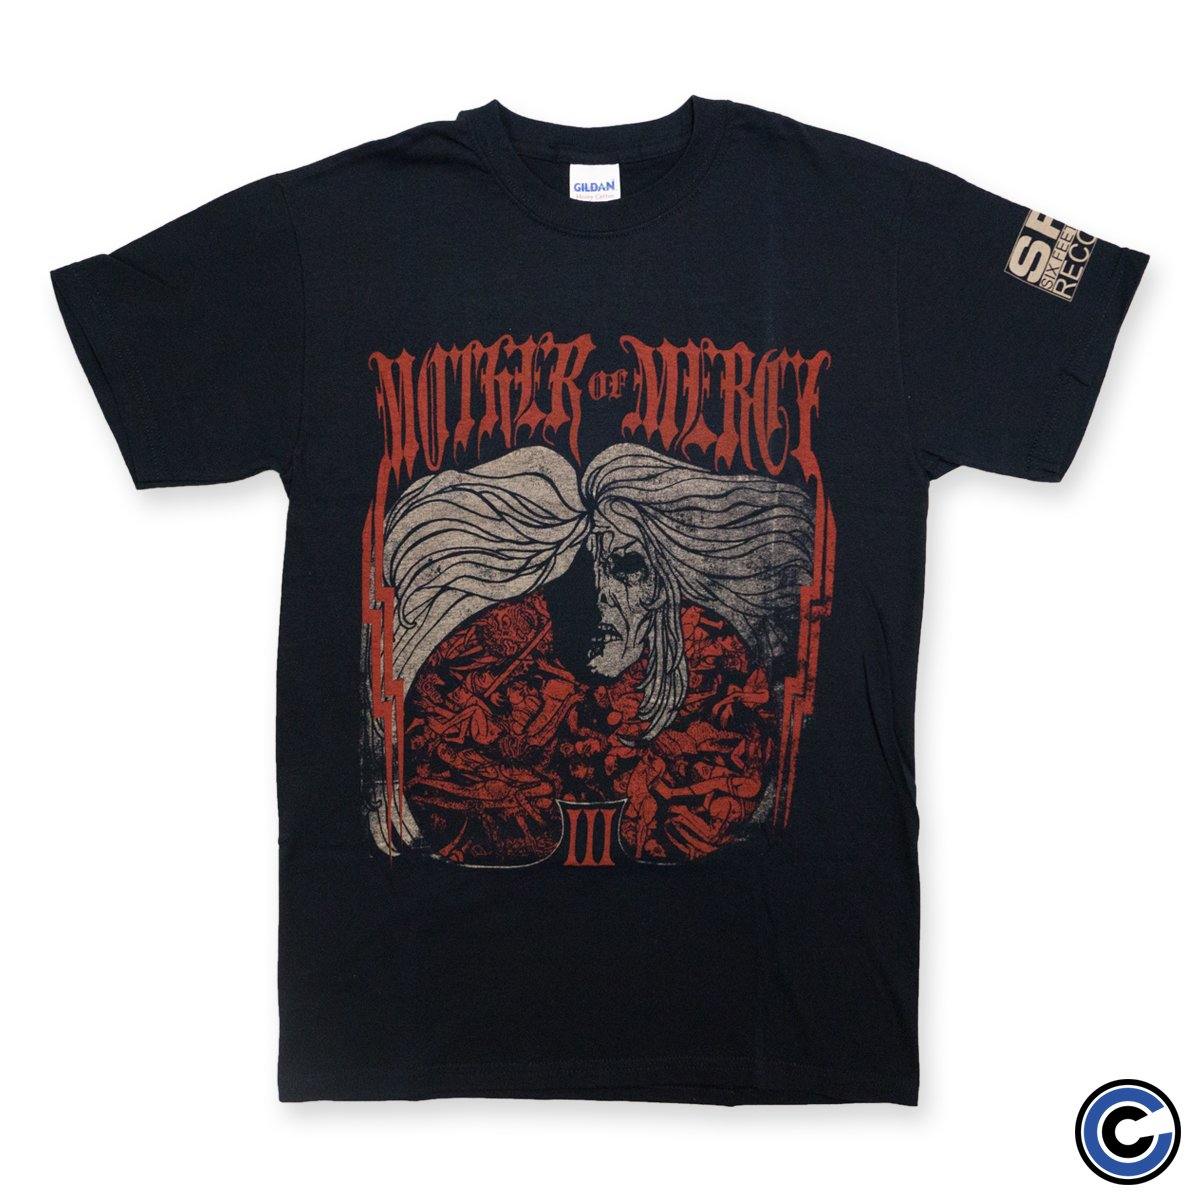 Buy – Mother of Mercy "III Color" Shirt – Band & Music Merch – Cold Cuts Merch